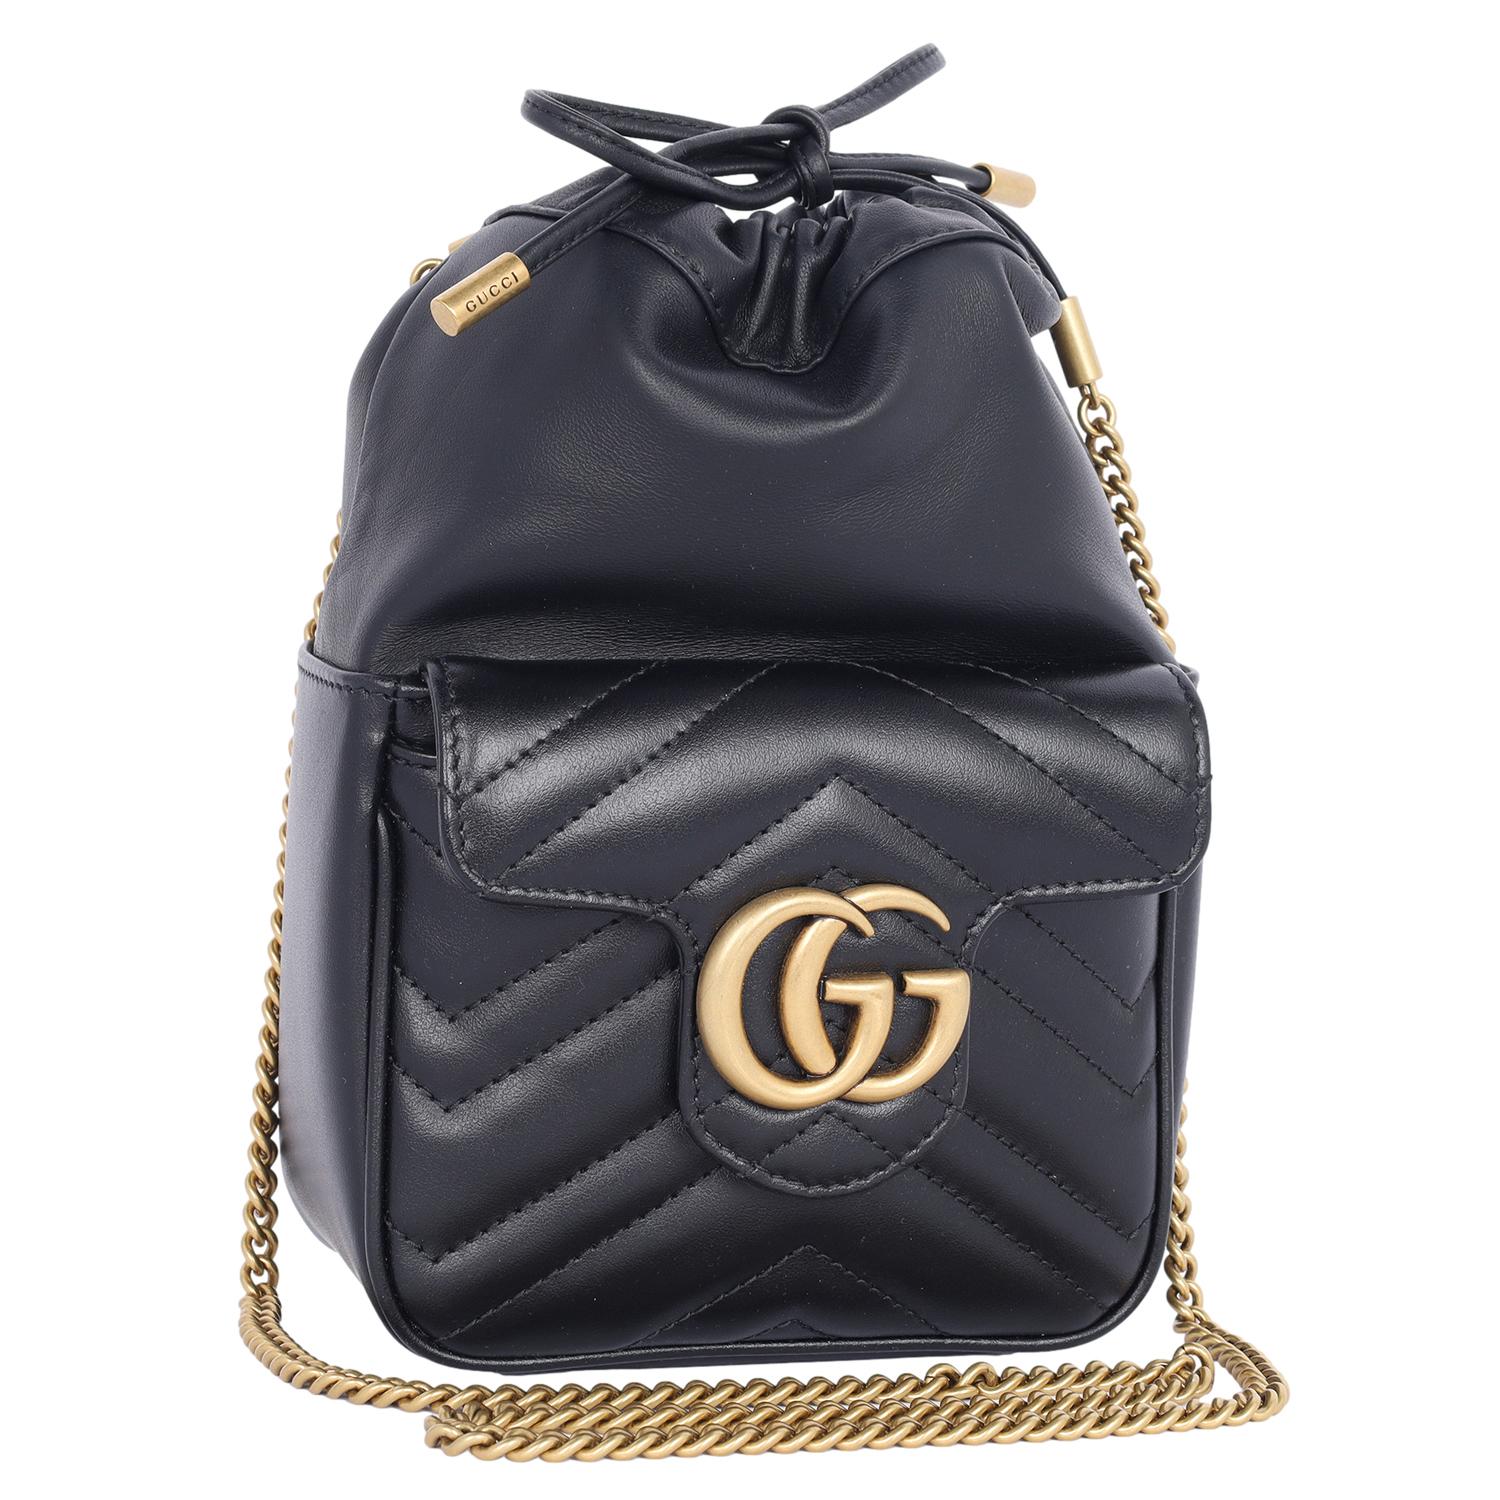 Authentic NEW Gucci Calfskin Matelasse Mini GG Marmont 2.0 Bucket Bag in Black. This bucket bag features soft calfskin leather with a black chevron quilted front pocket, aged gold chain strap, top leather cinch drawstring closure, aged gold GG logo